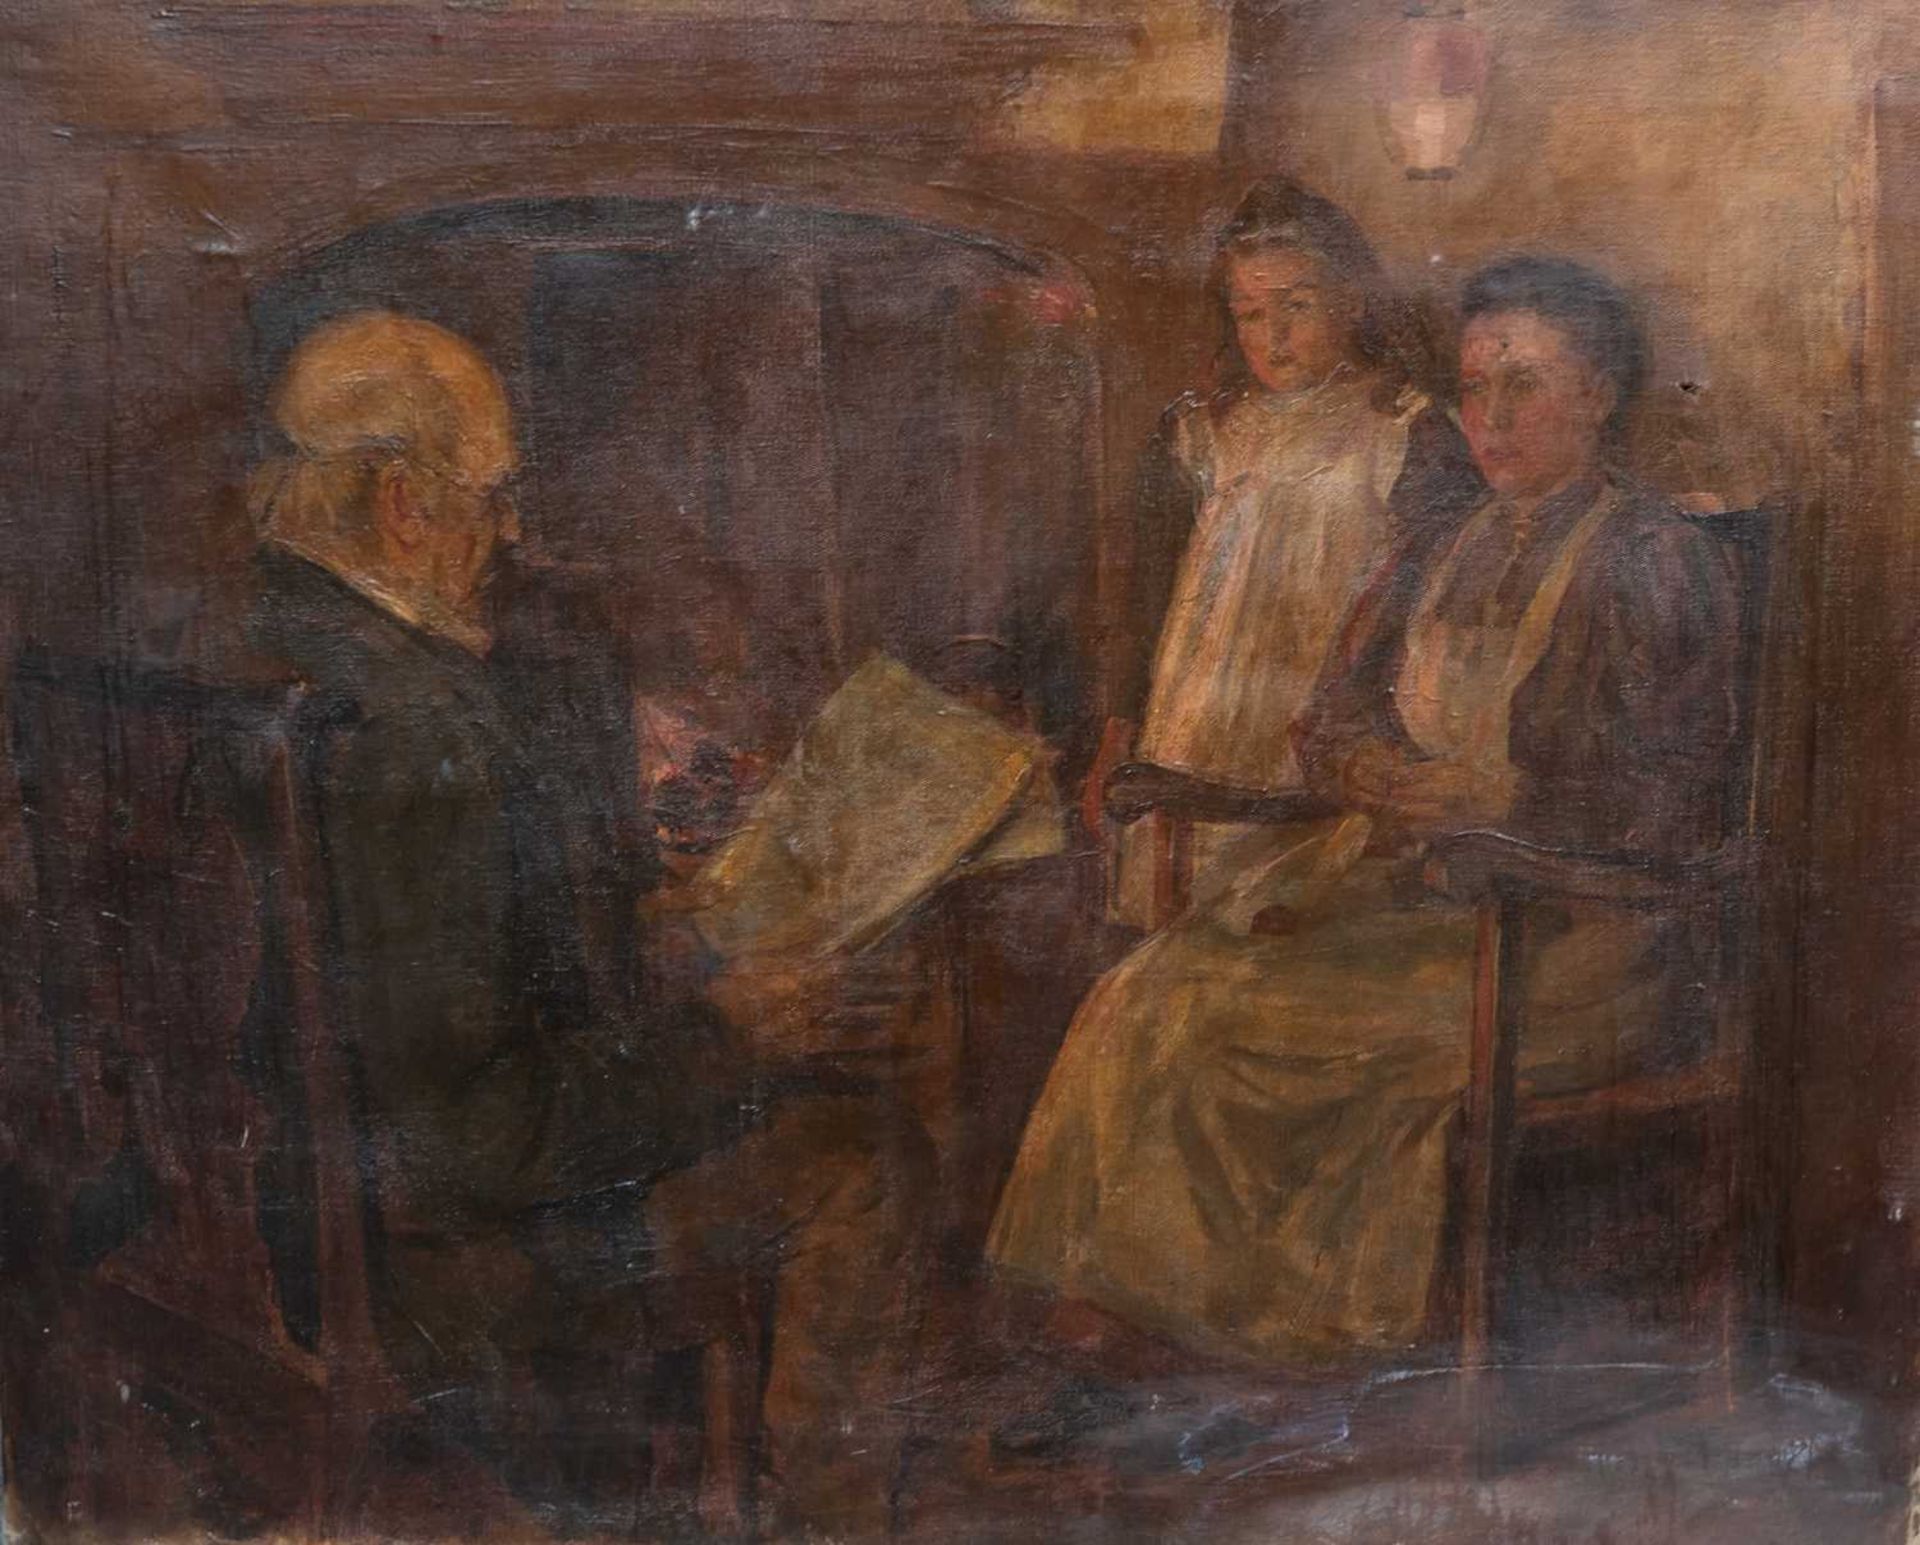 STAITHES SCHOOL (19TH CENTURY) FAMILY IN AN INTERIOR - Image 2 of 3